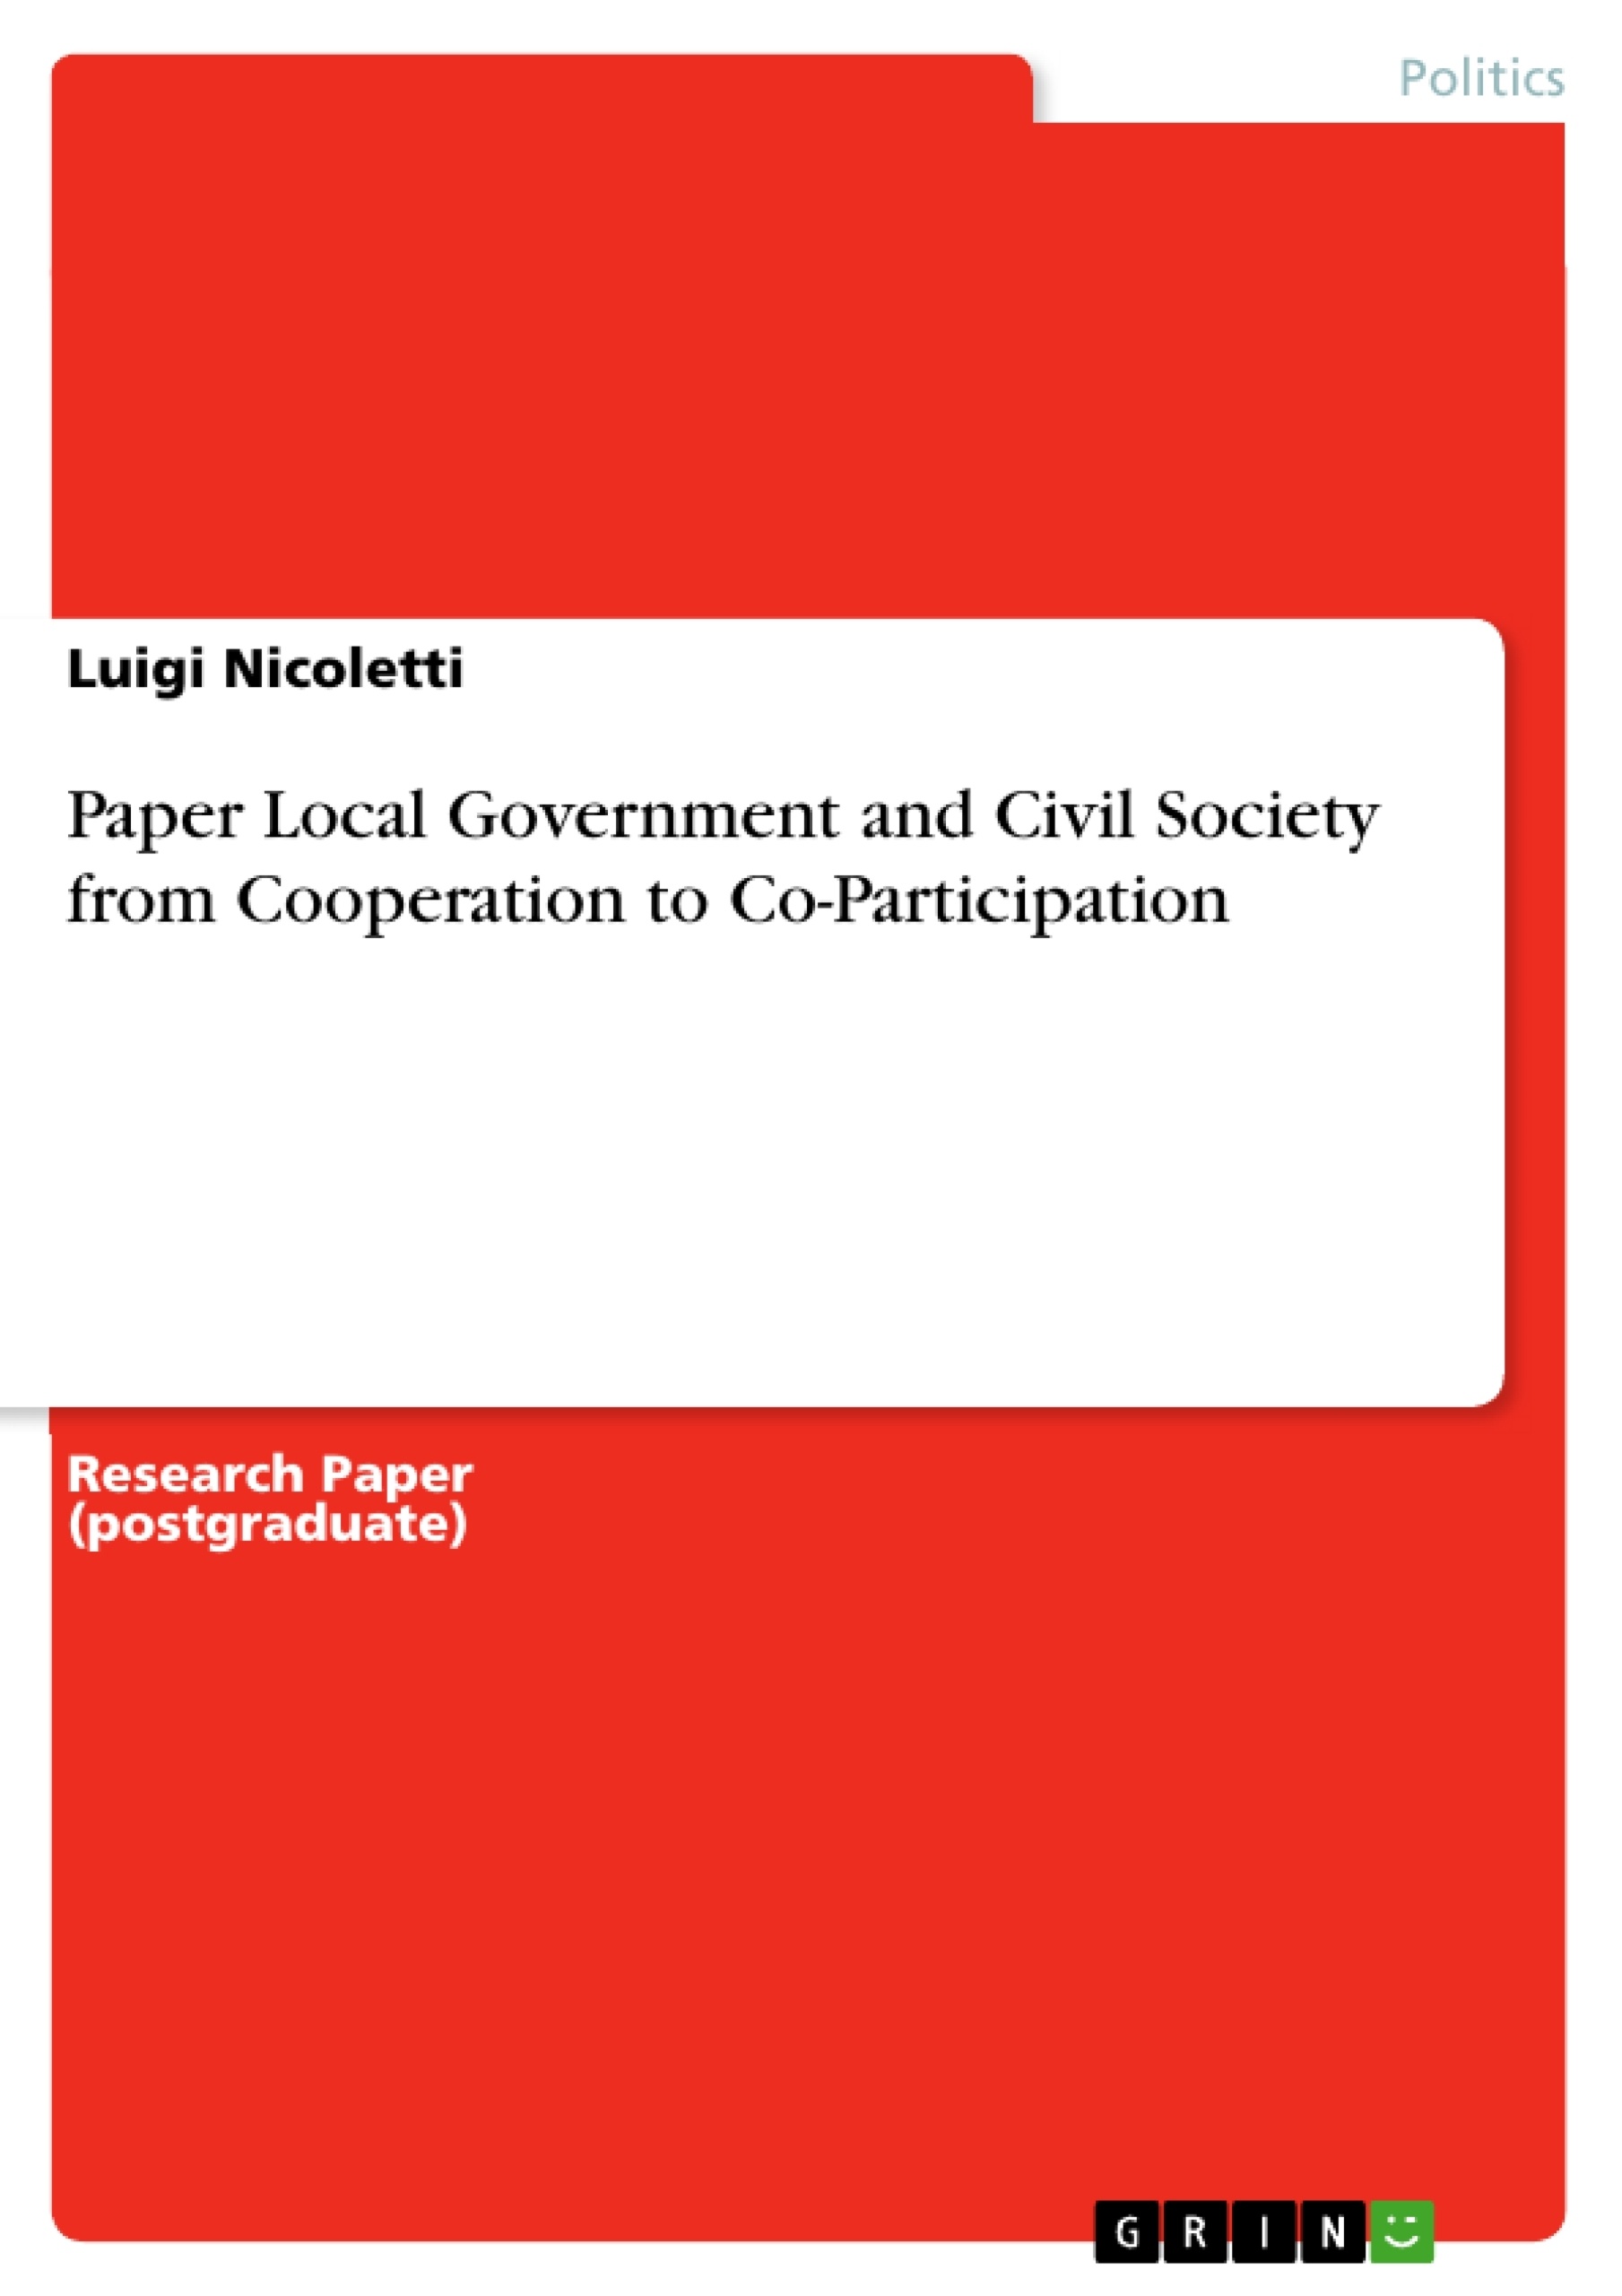 Title: Paper Local Government and Civil Society from Cooperation to Co-Participation